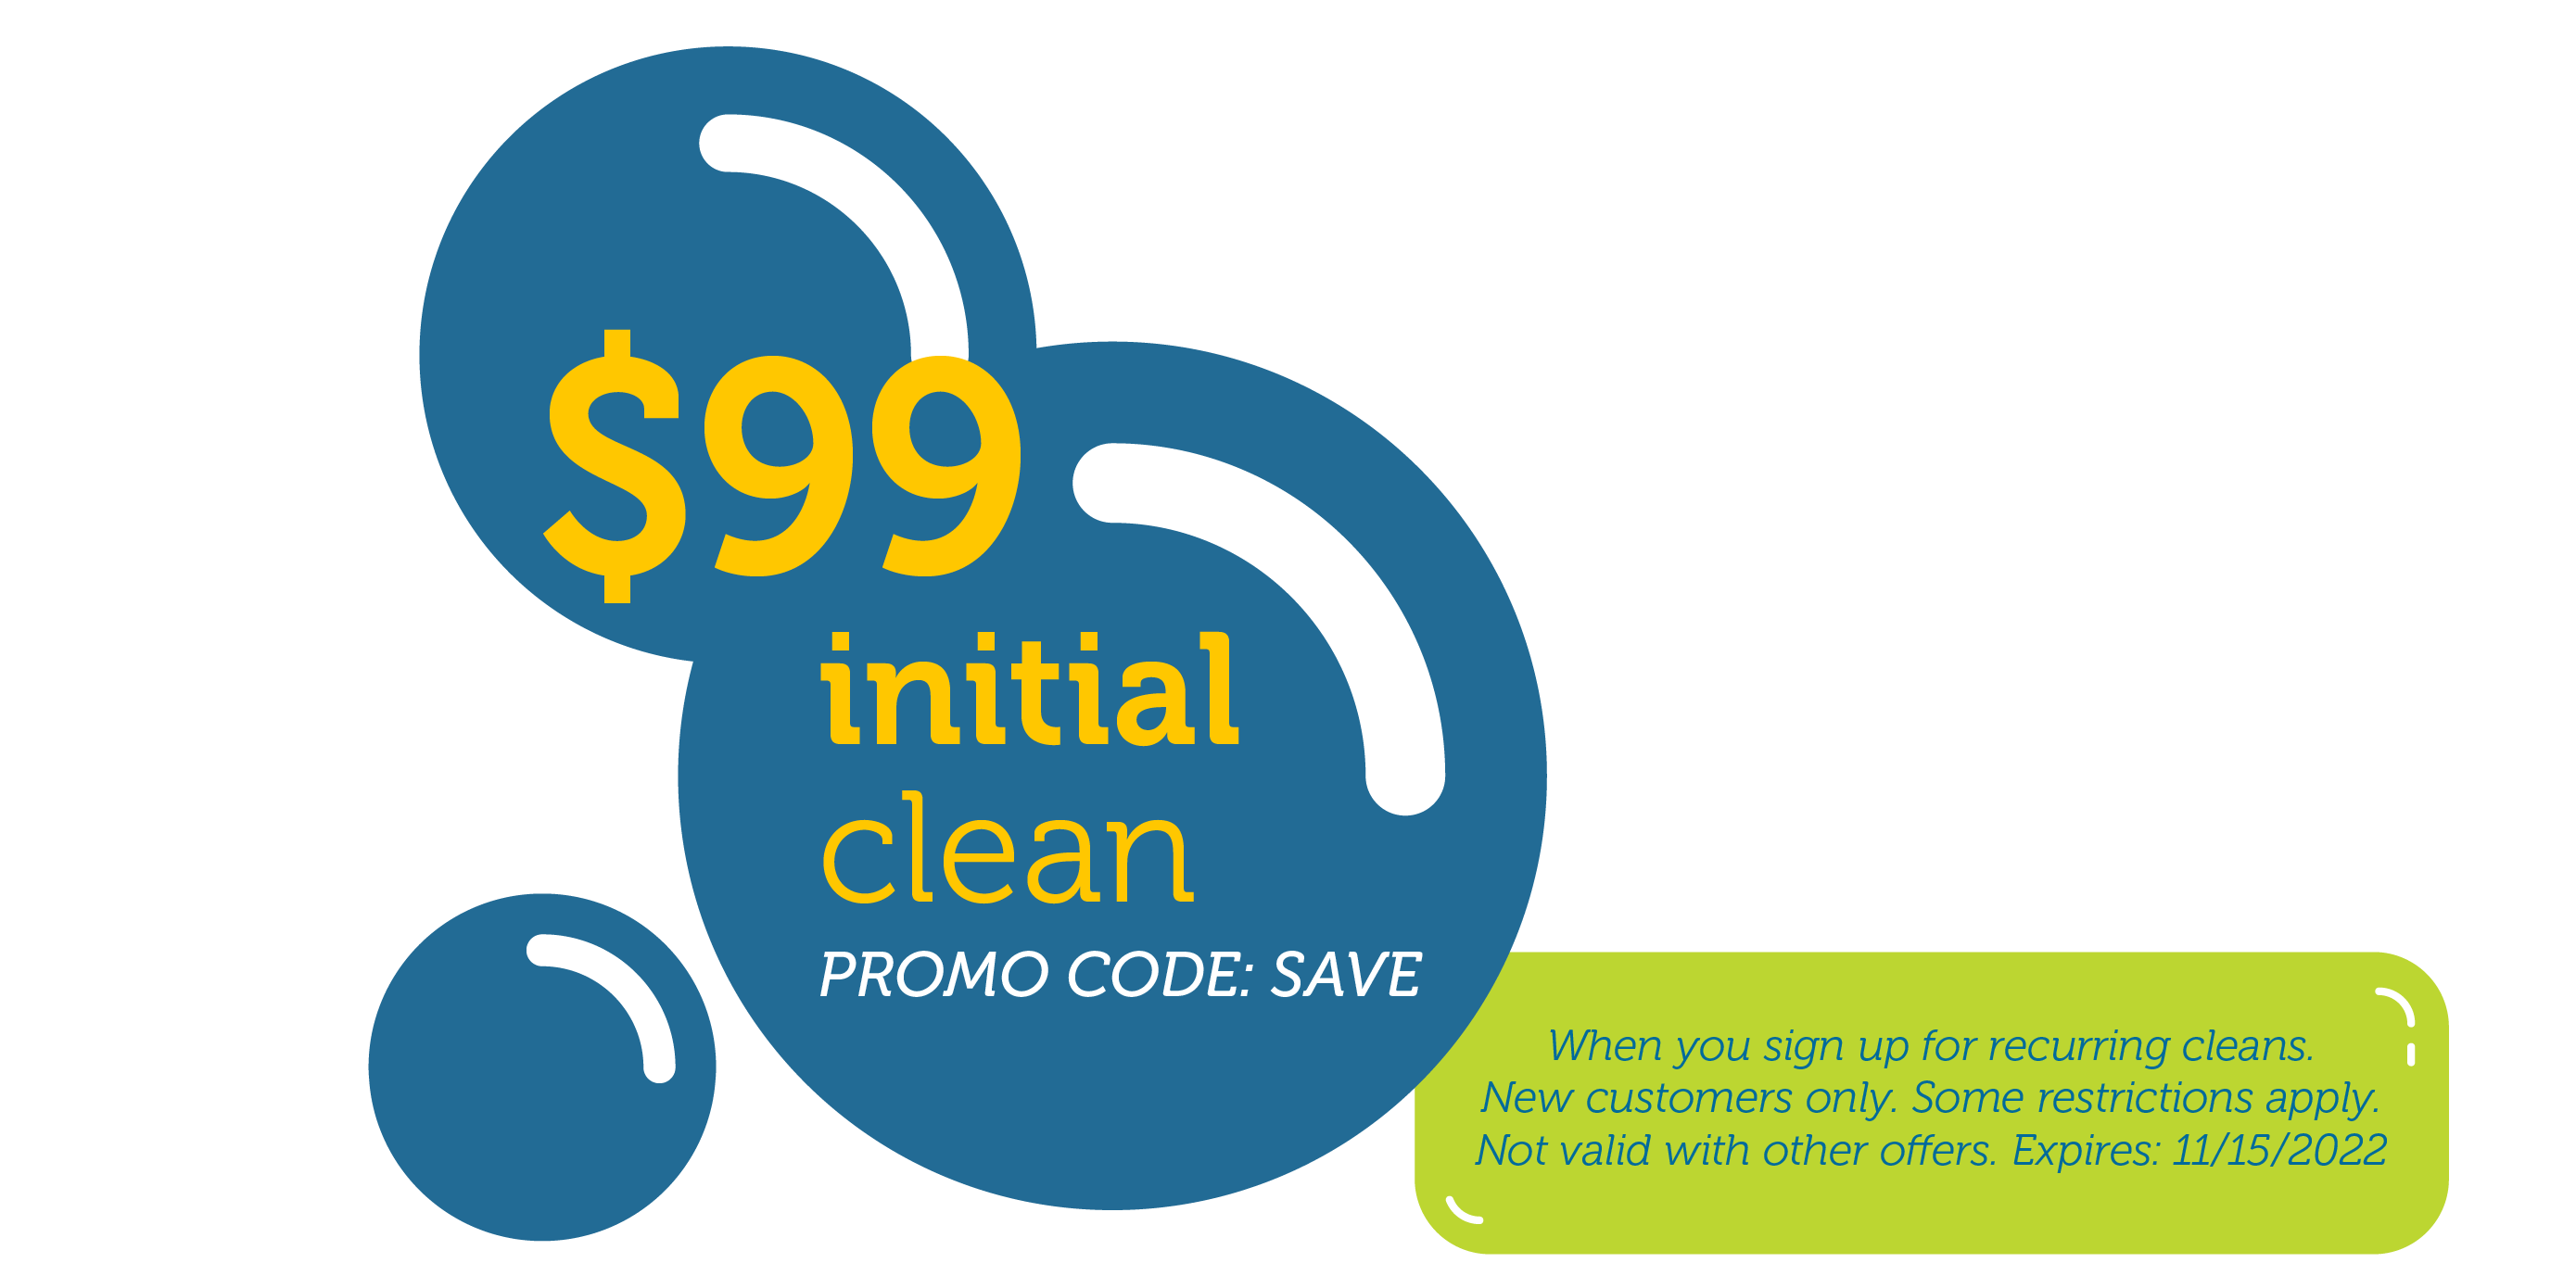 Coupon highlighting $99 for initial home cleaning service